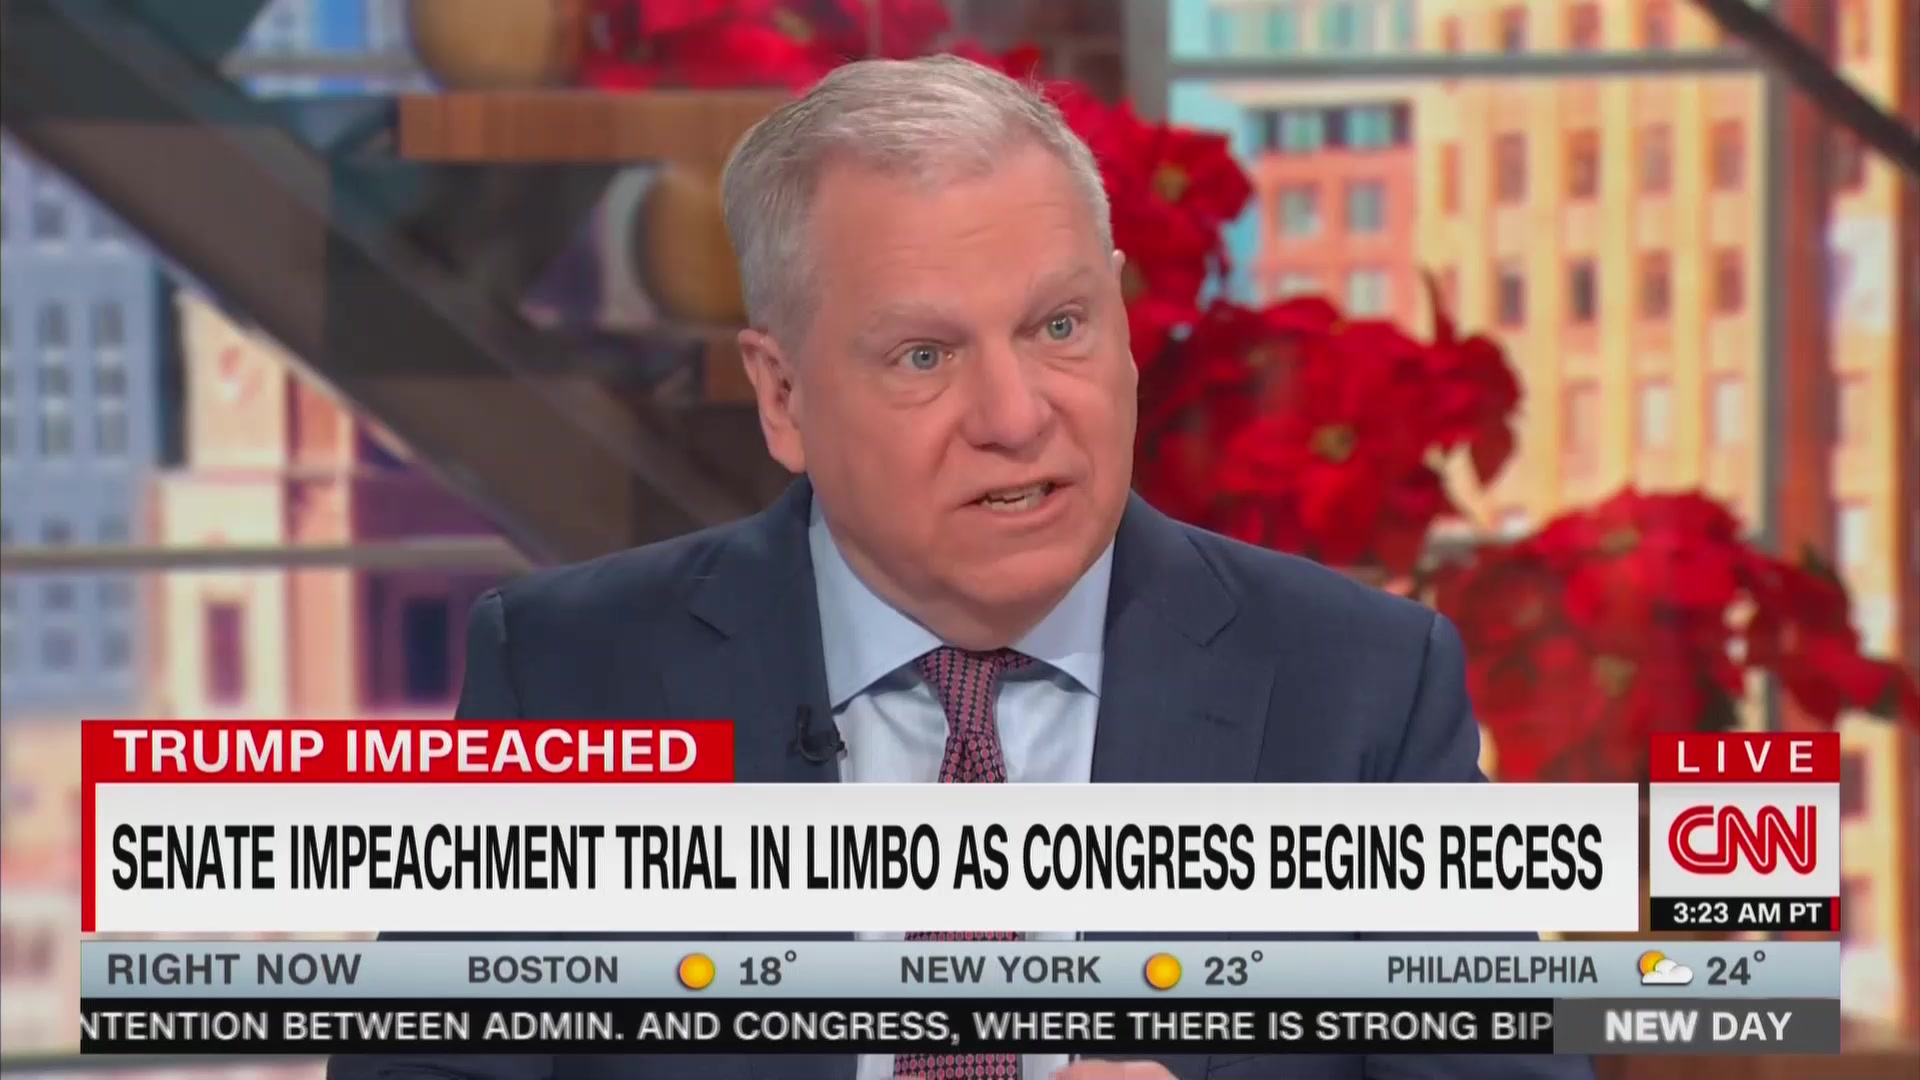 Pelosi Has ‘Driven a Wedge Between McConnell and Trump,’ Ex-WH Press Secretary Says